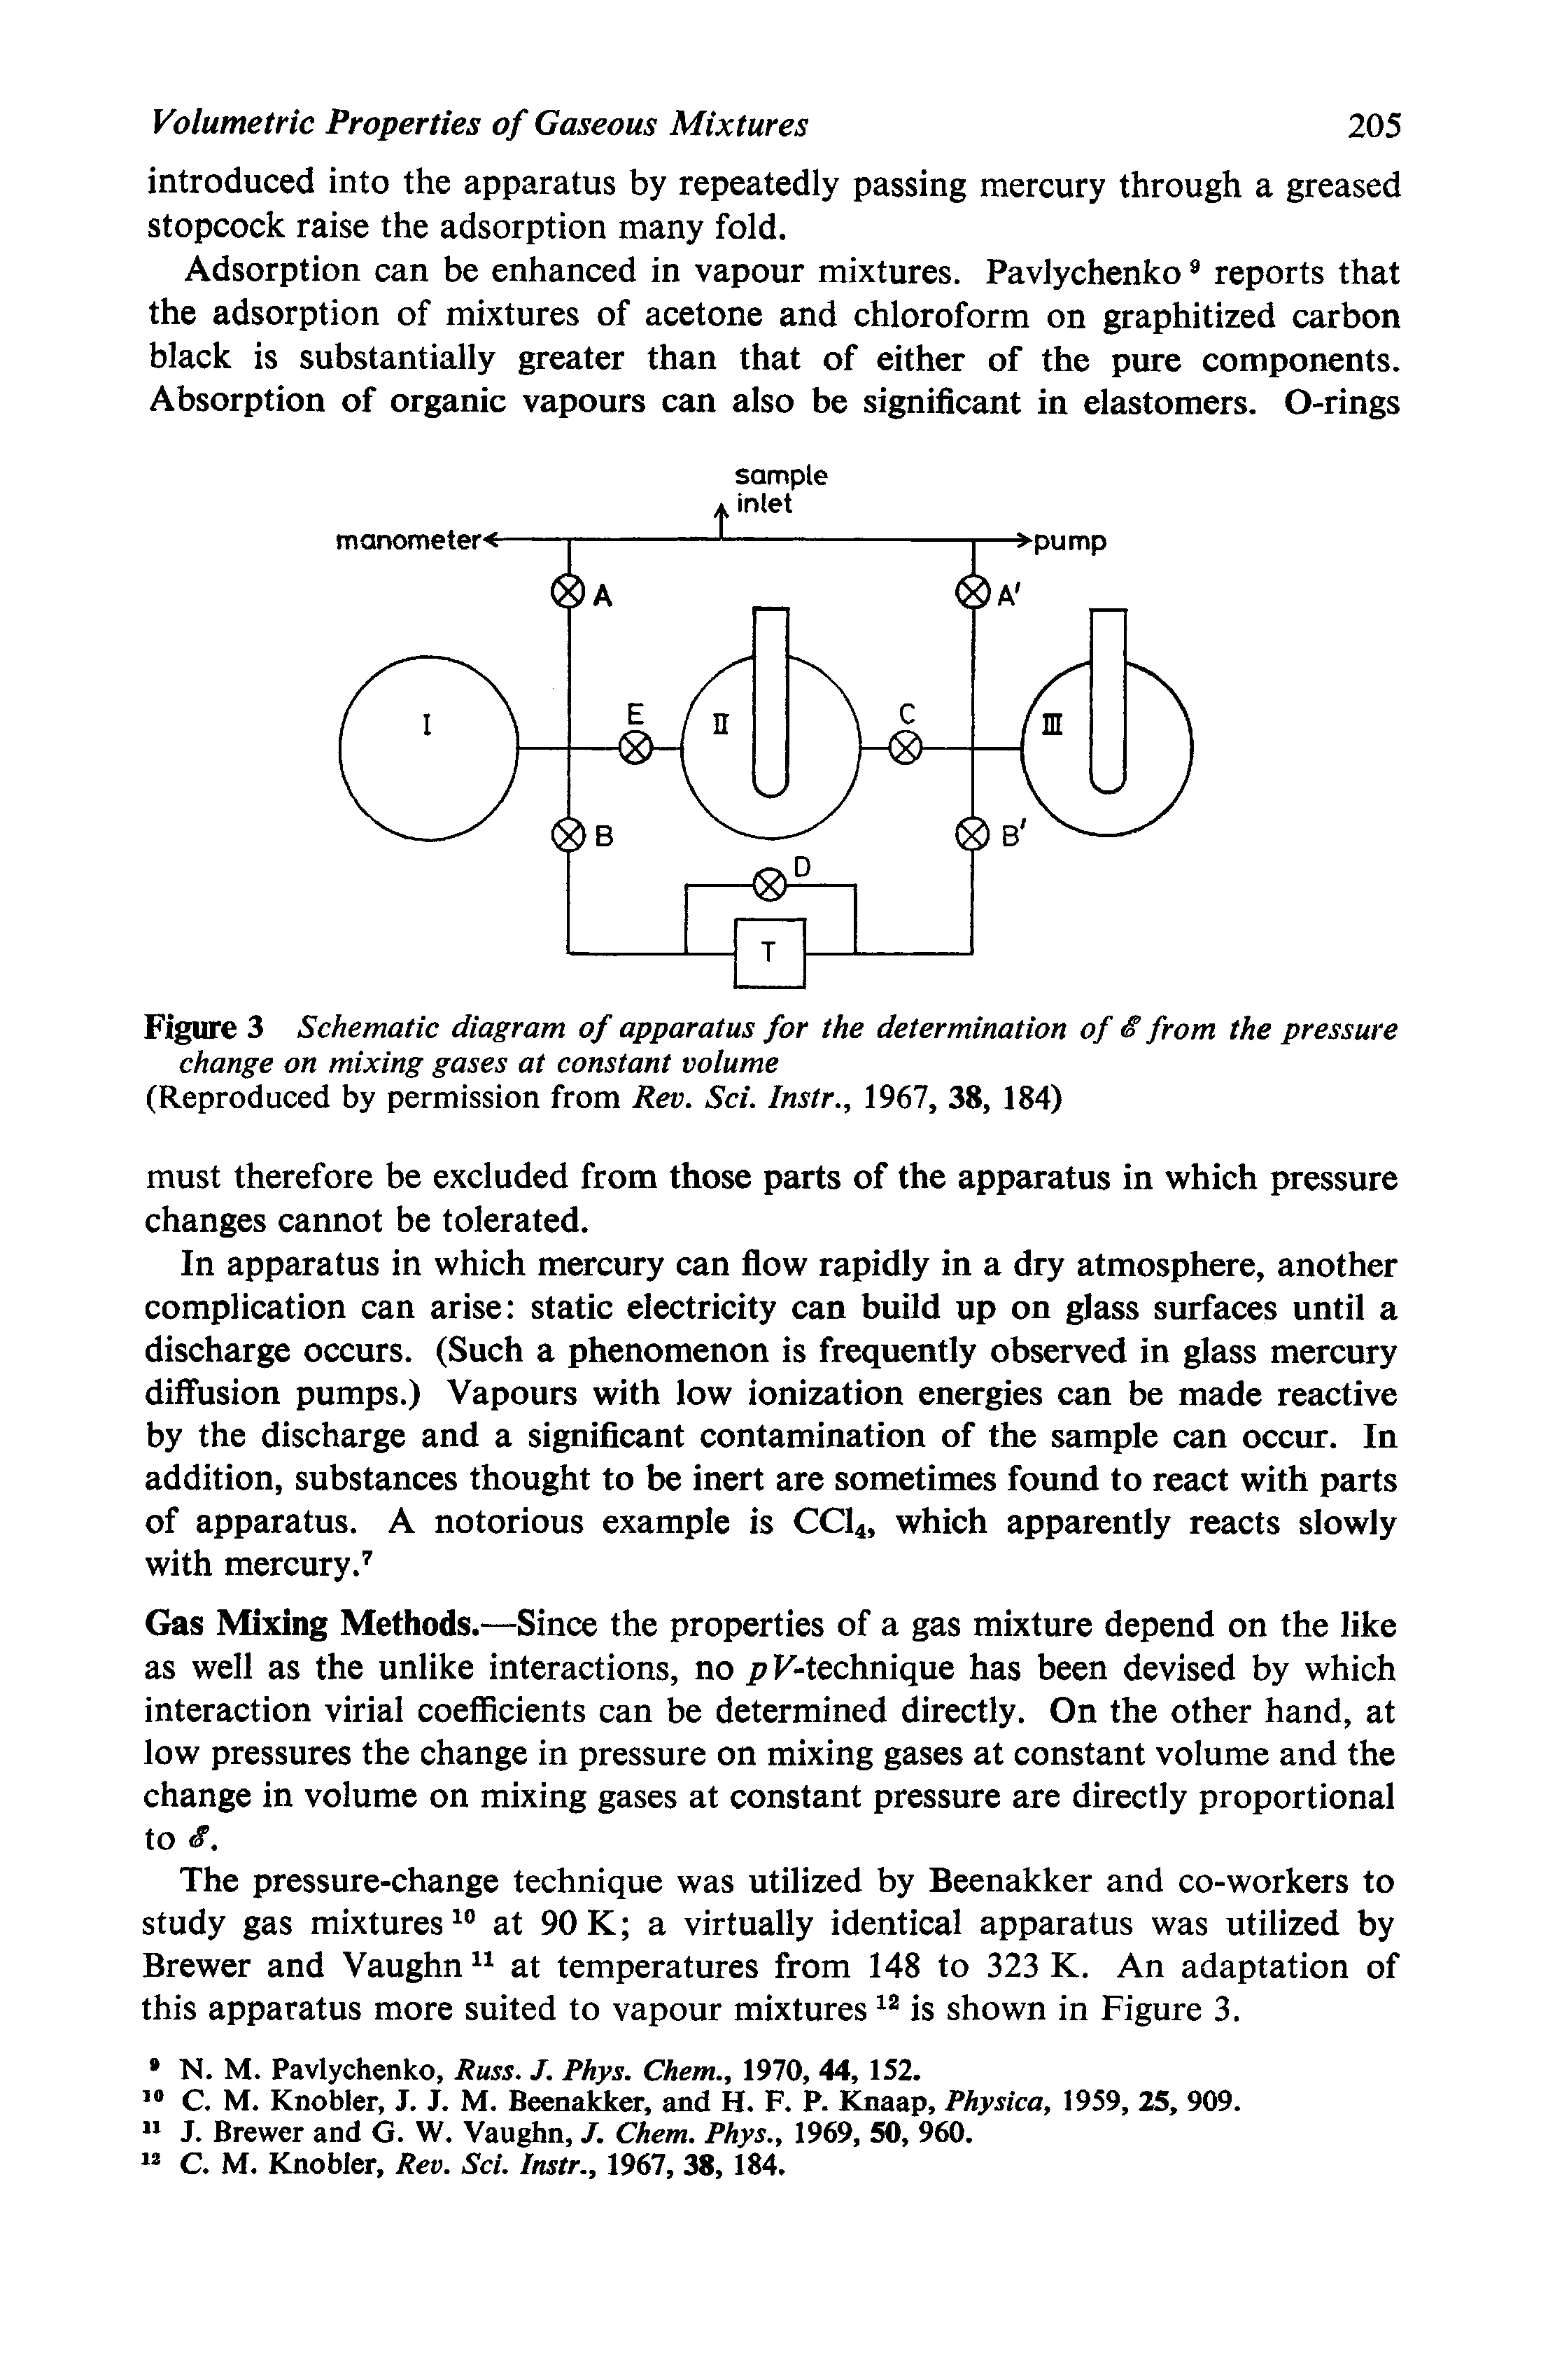 Figure 3 Schematic diagram of apparatus for the determination of S from the pressure change on mixing gases at constant volume (Reproduced by permission from Rev. Sci. Instr., 1967, 38, 184)...